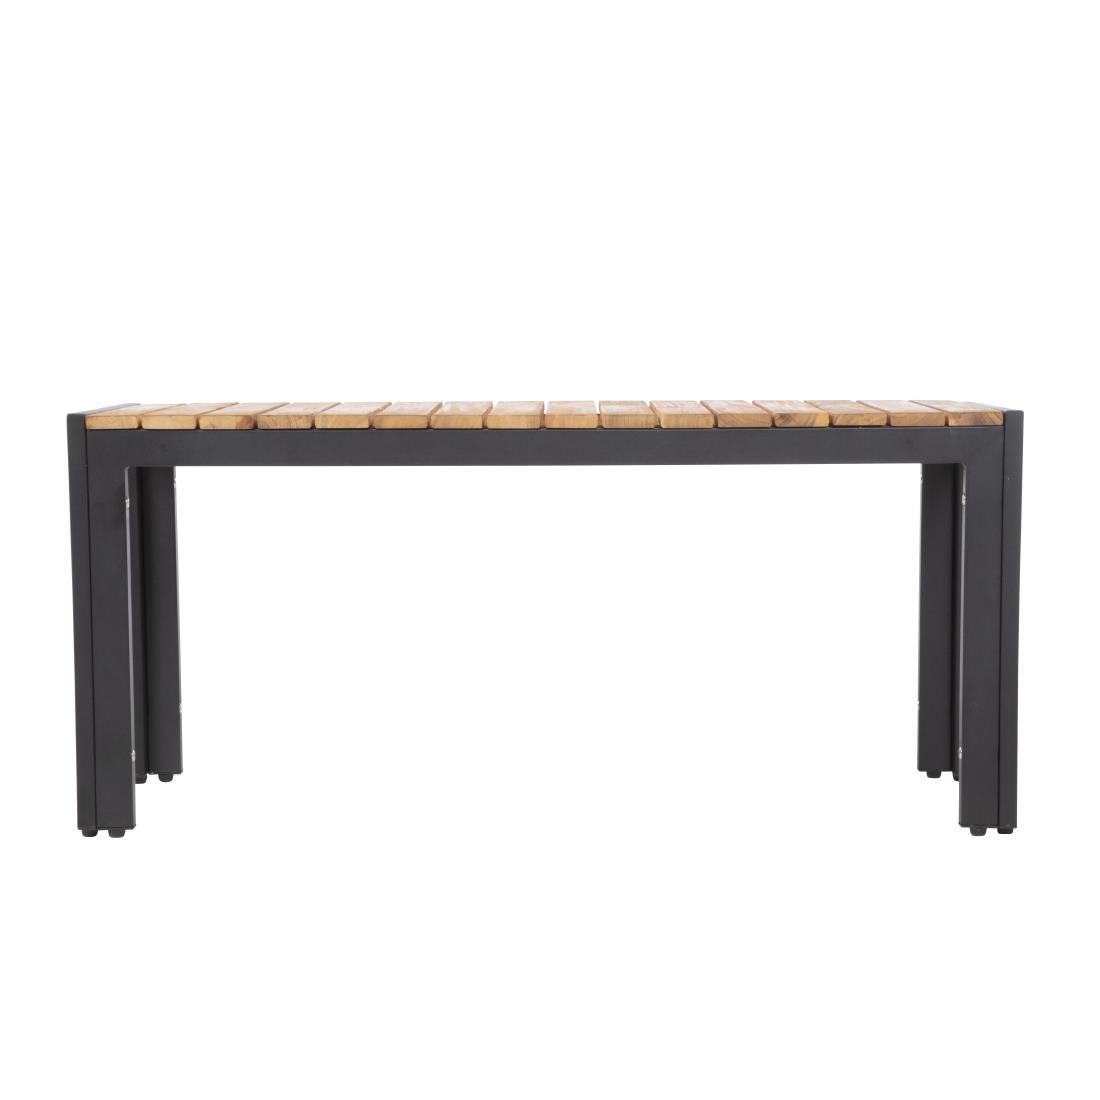 Bolero Rectangular Steel and Acacia Benches 1000mm (Pack of 2) - DS154  - 2